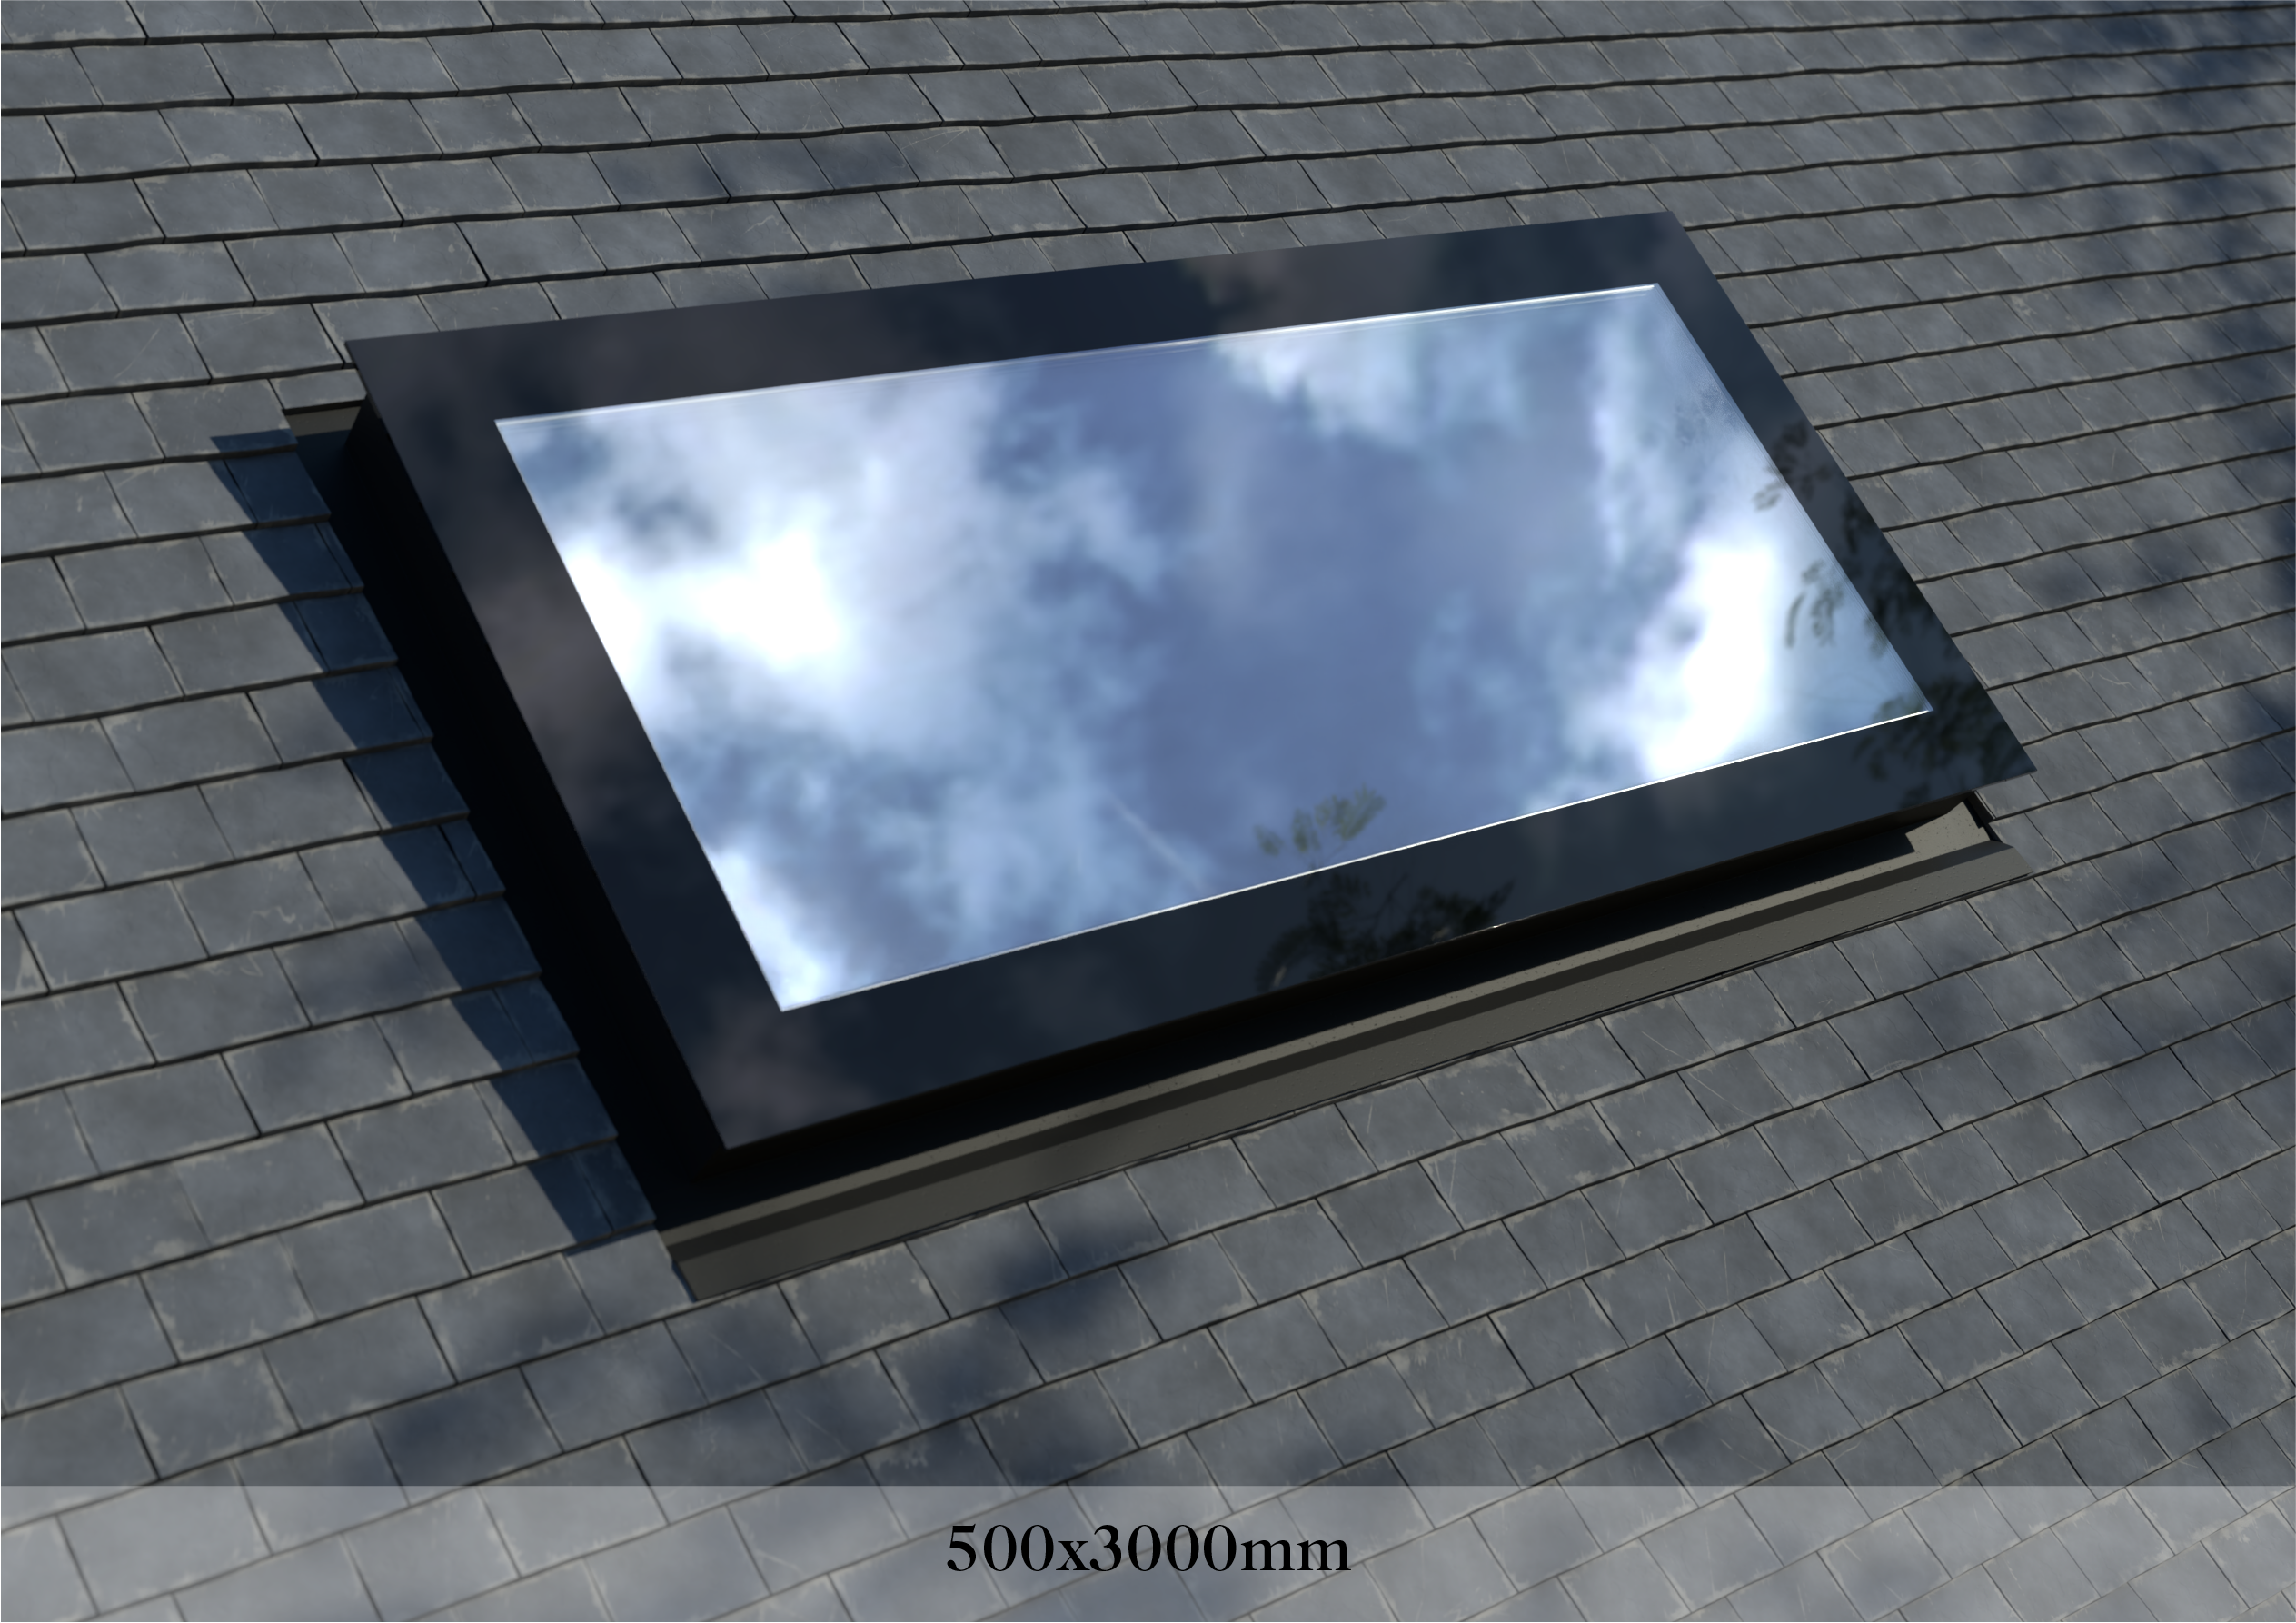 Pitched Roof Skylight 500 x 3000mm